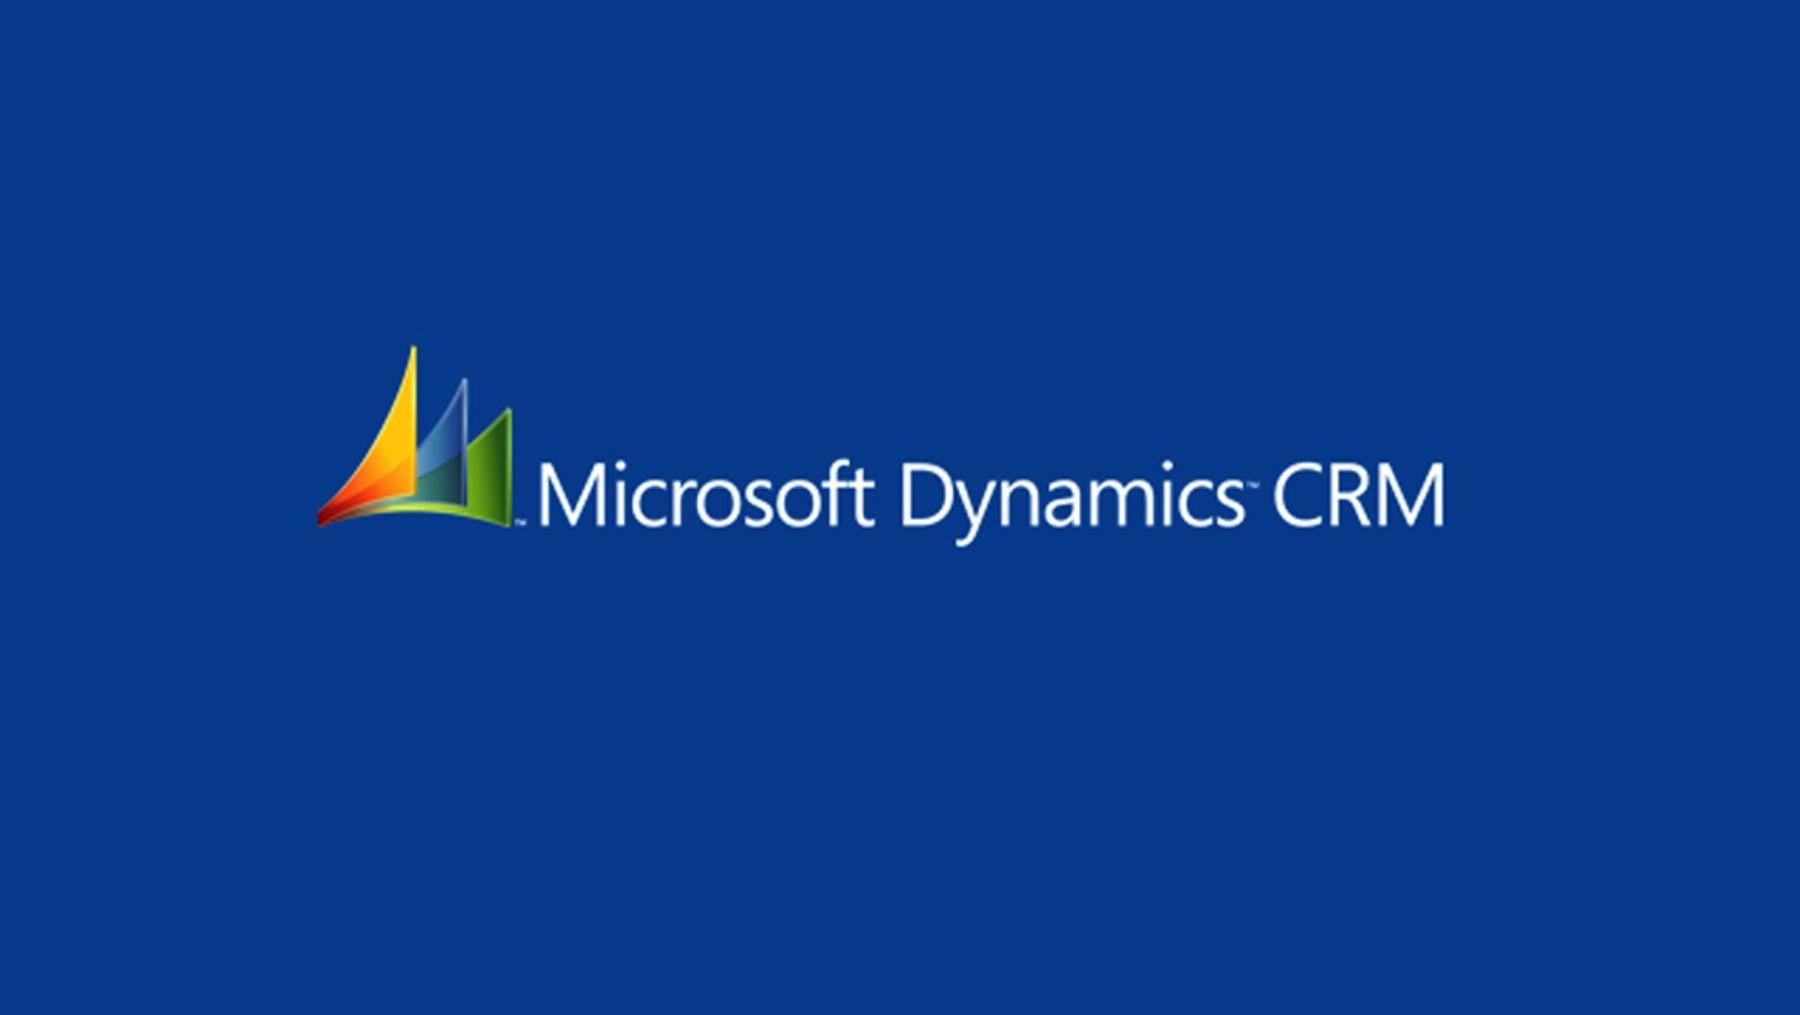 Azure Dynamics CRM Logo - HP to deploy and use Microsoft's Dynamics CRM in six-year agreement ...